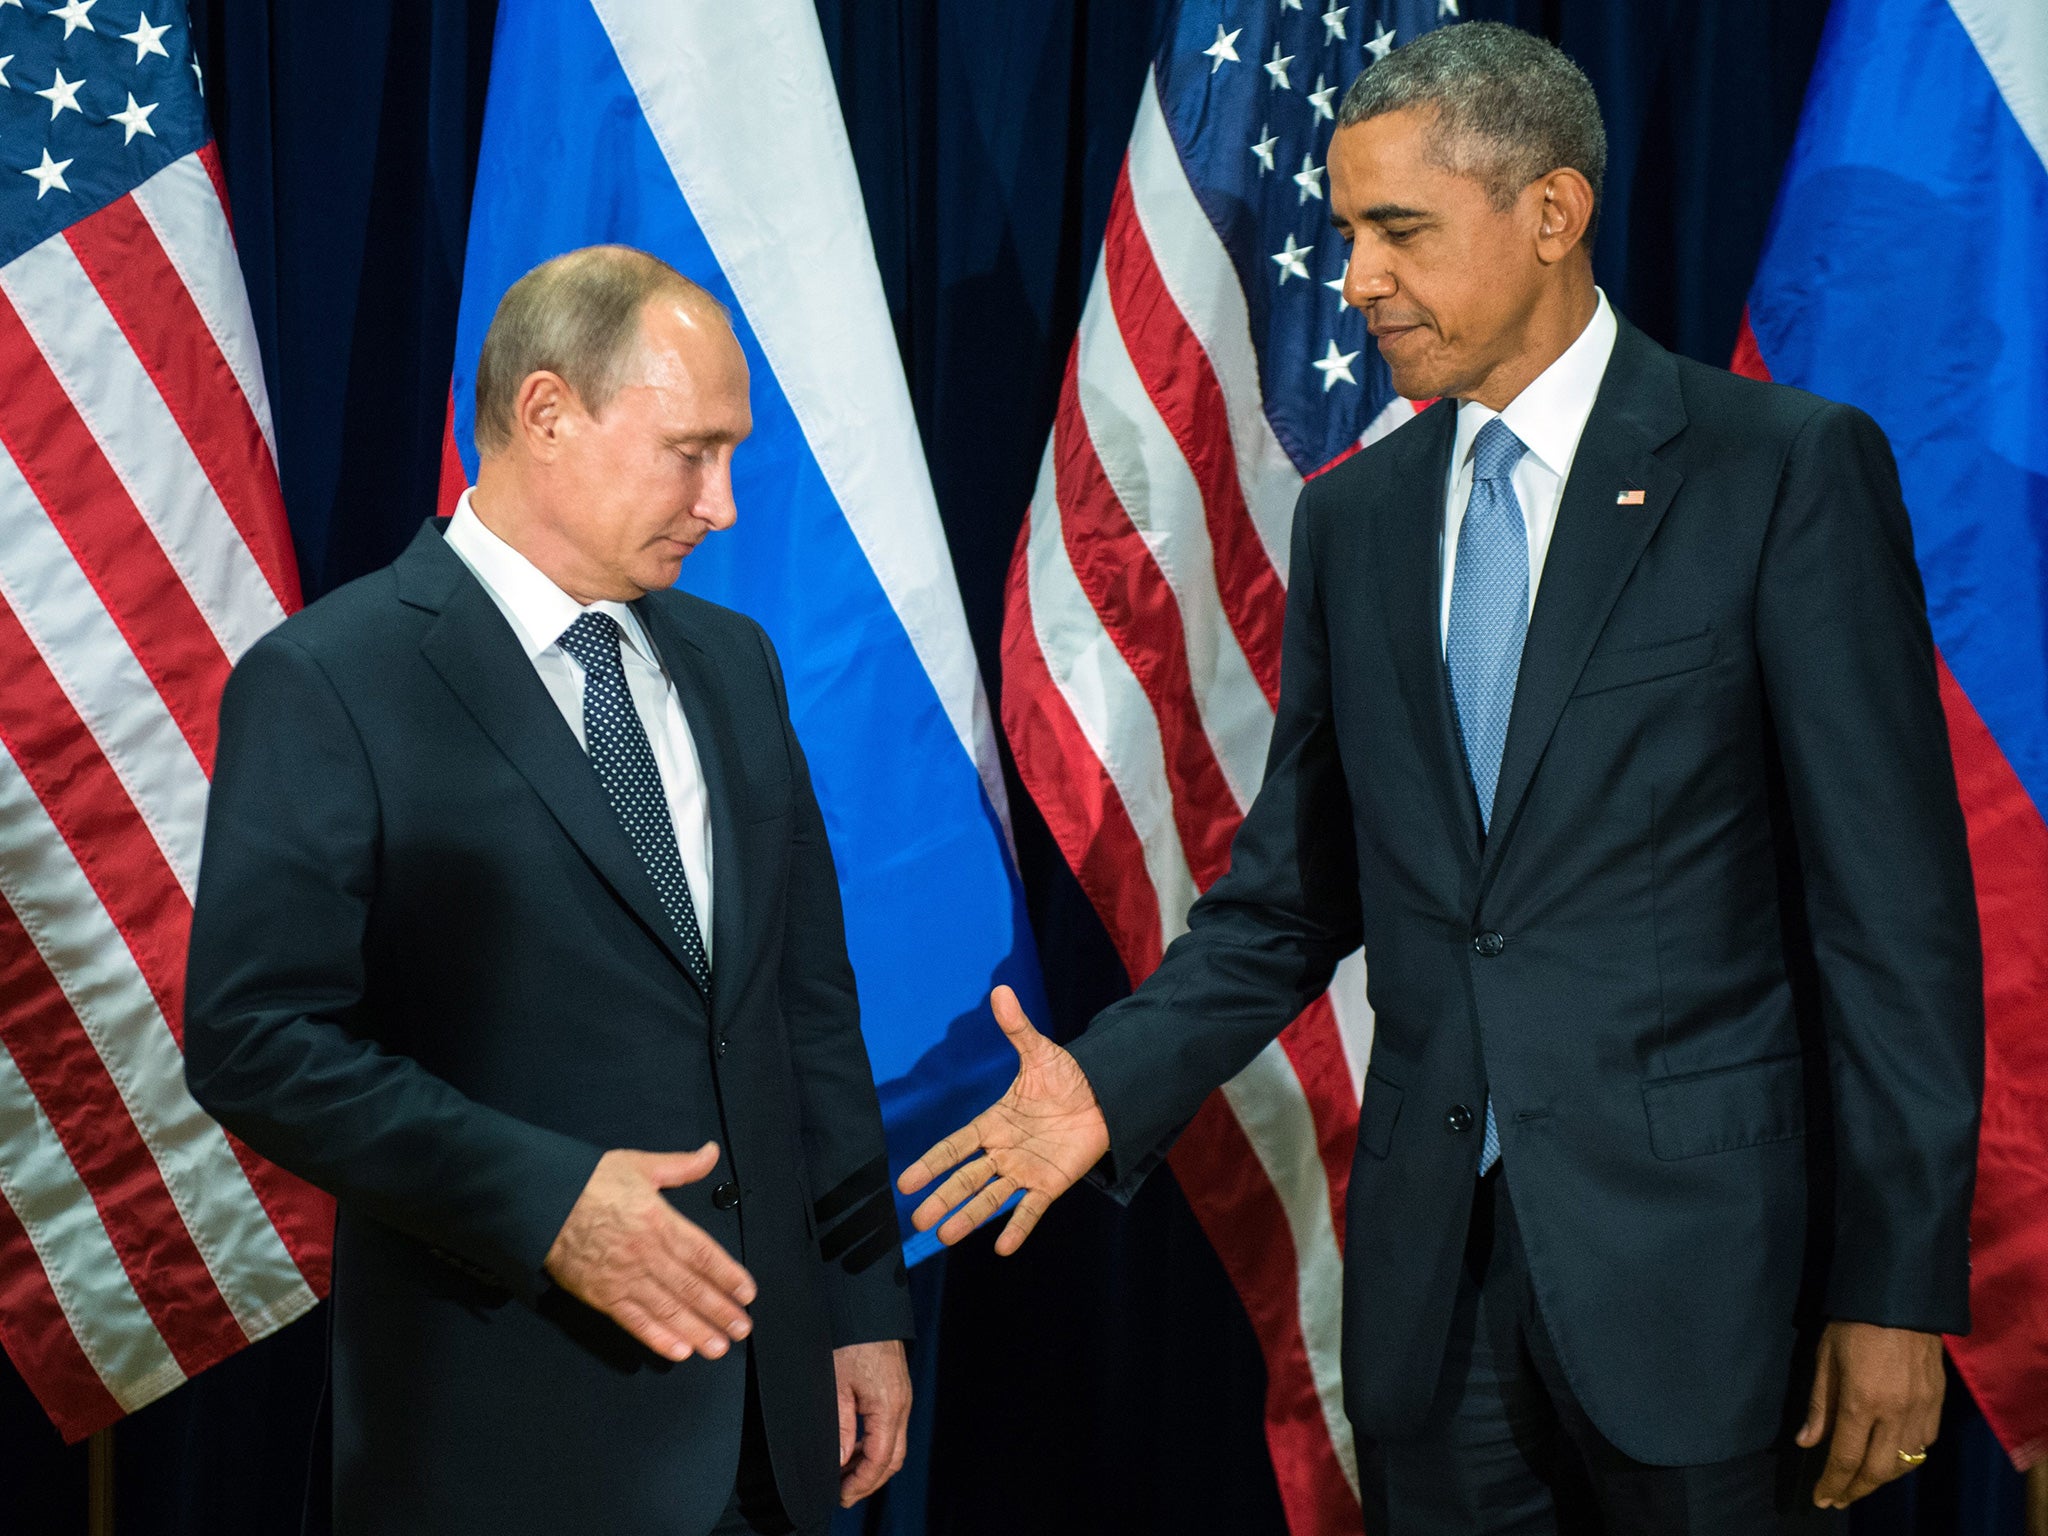 US President Barack Obama and Russian counterpart Vladimir Putin shake hands at a UN meeting in New York